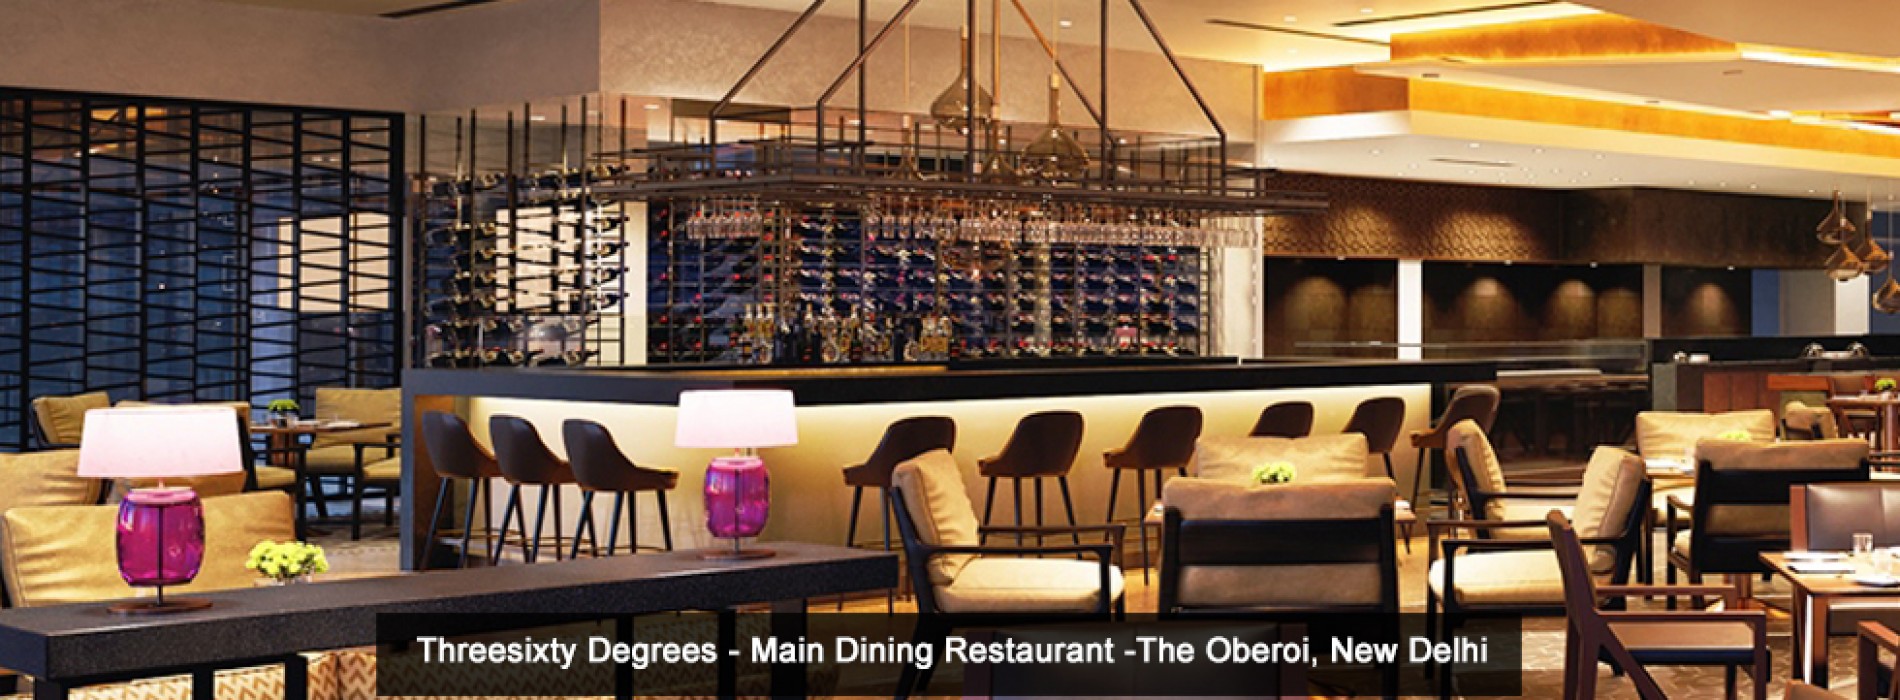 The Oberoi Group announces the highly anticipated reopening of The Oberoi, New Delhi